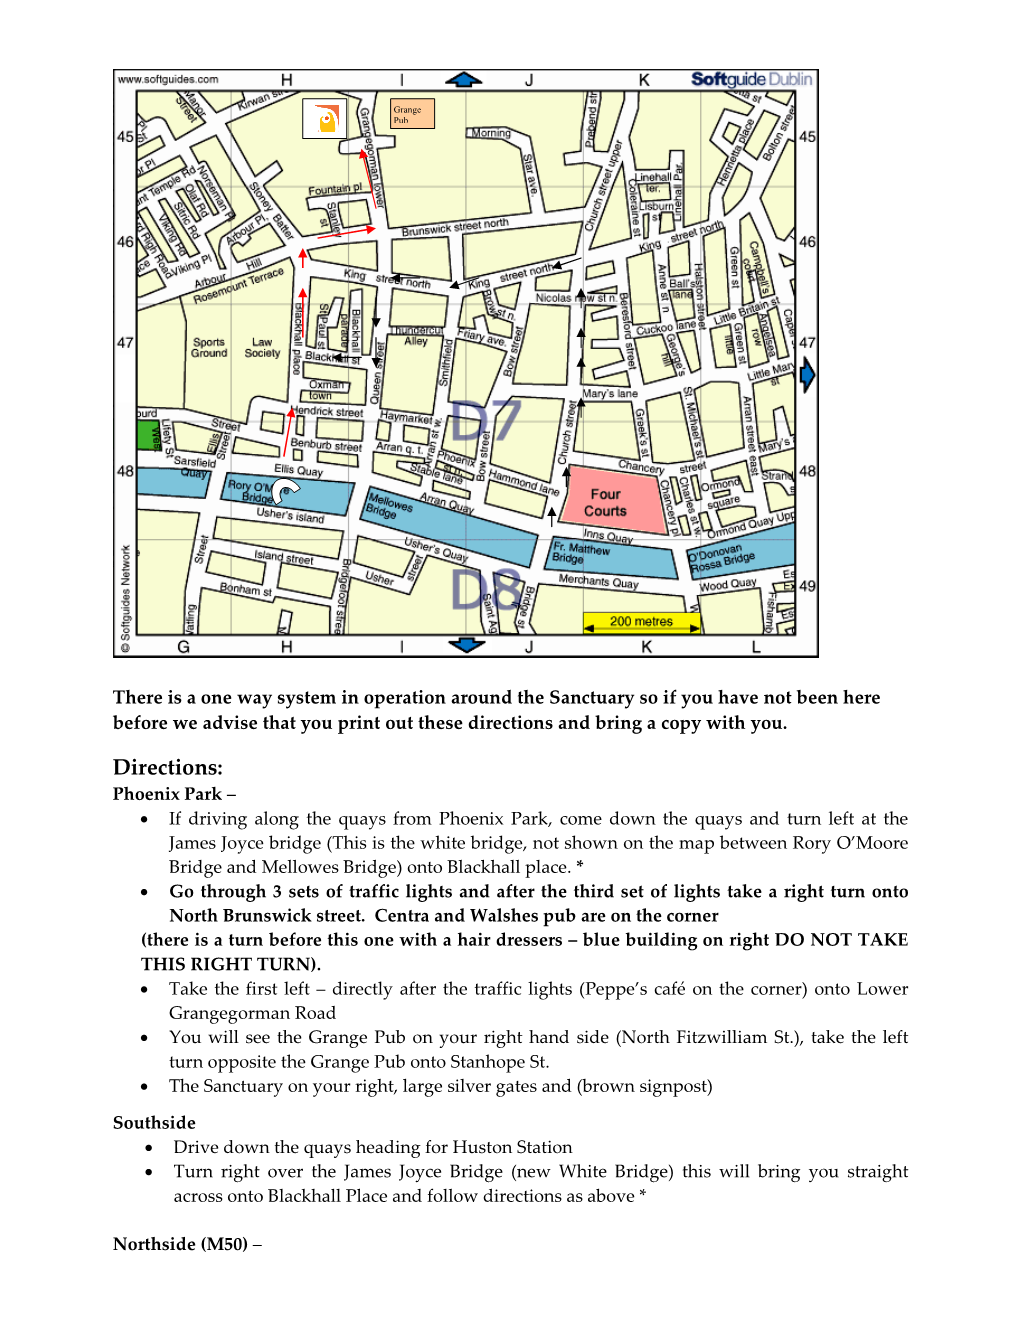 Map and Directions to the Sanctuary.Pdf